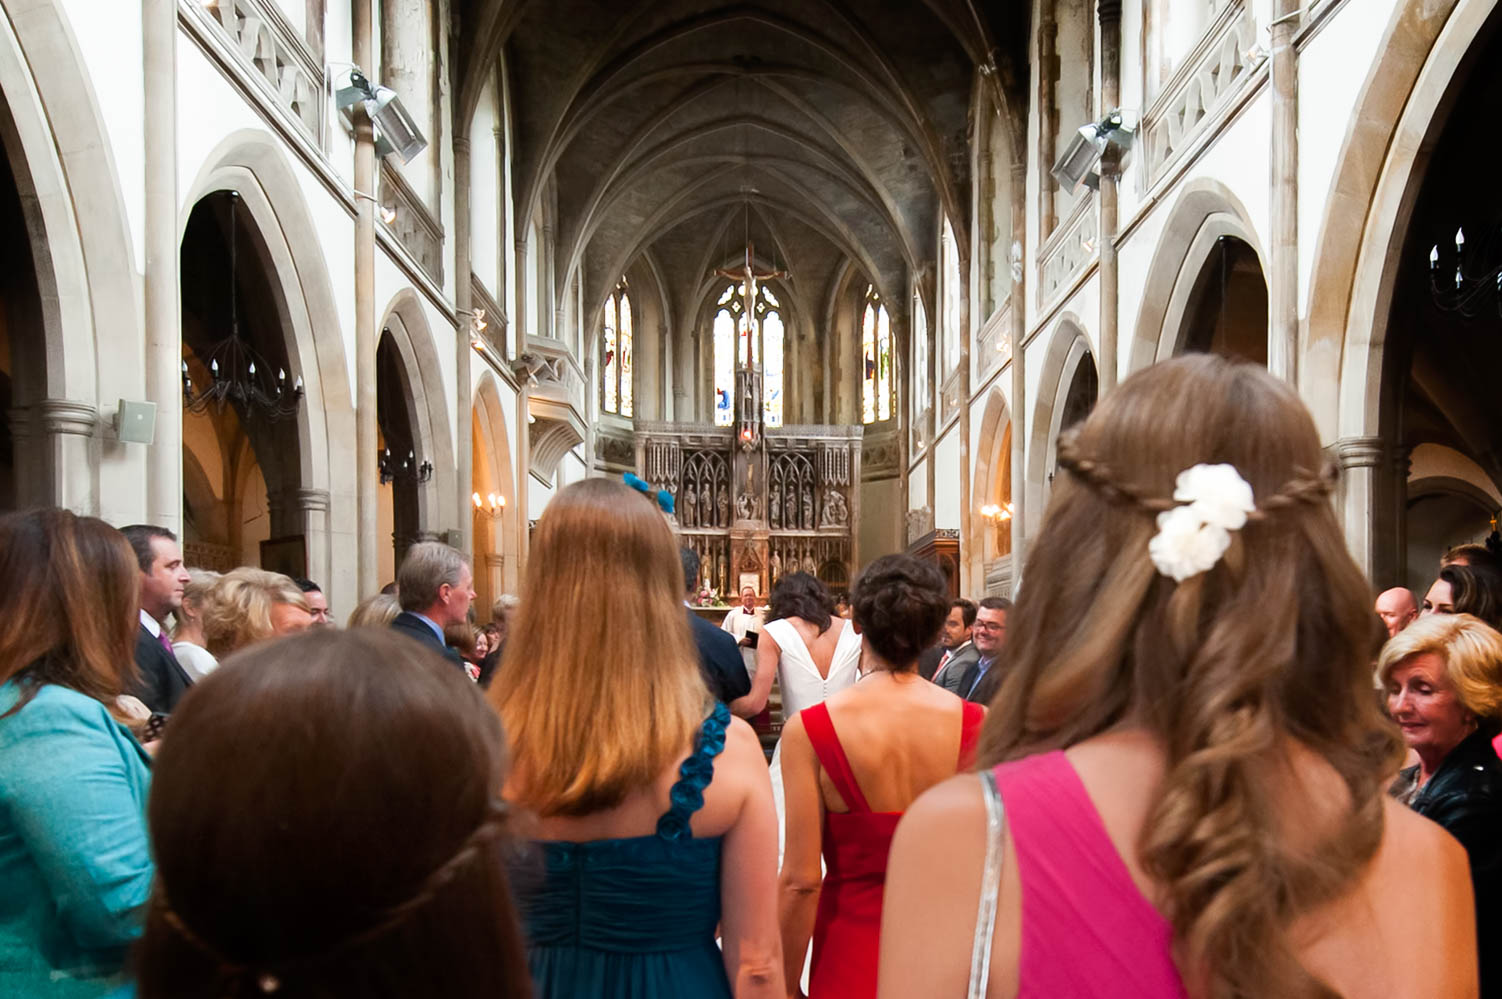 Bridal party walking down the aisle in St Mary Star of the Sea church in Hastings